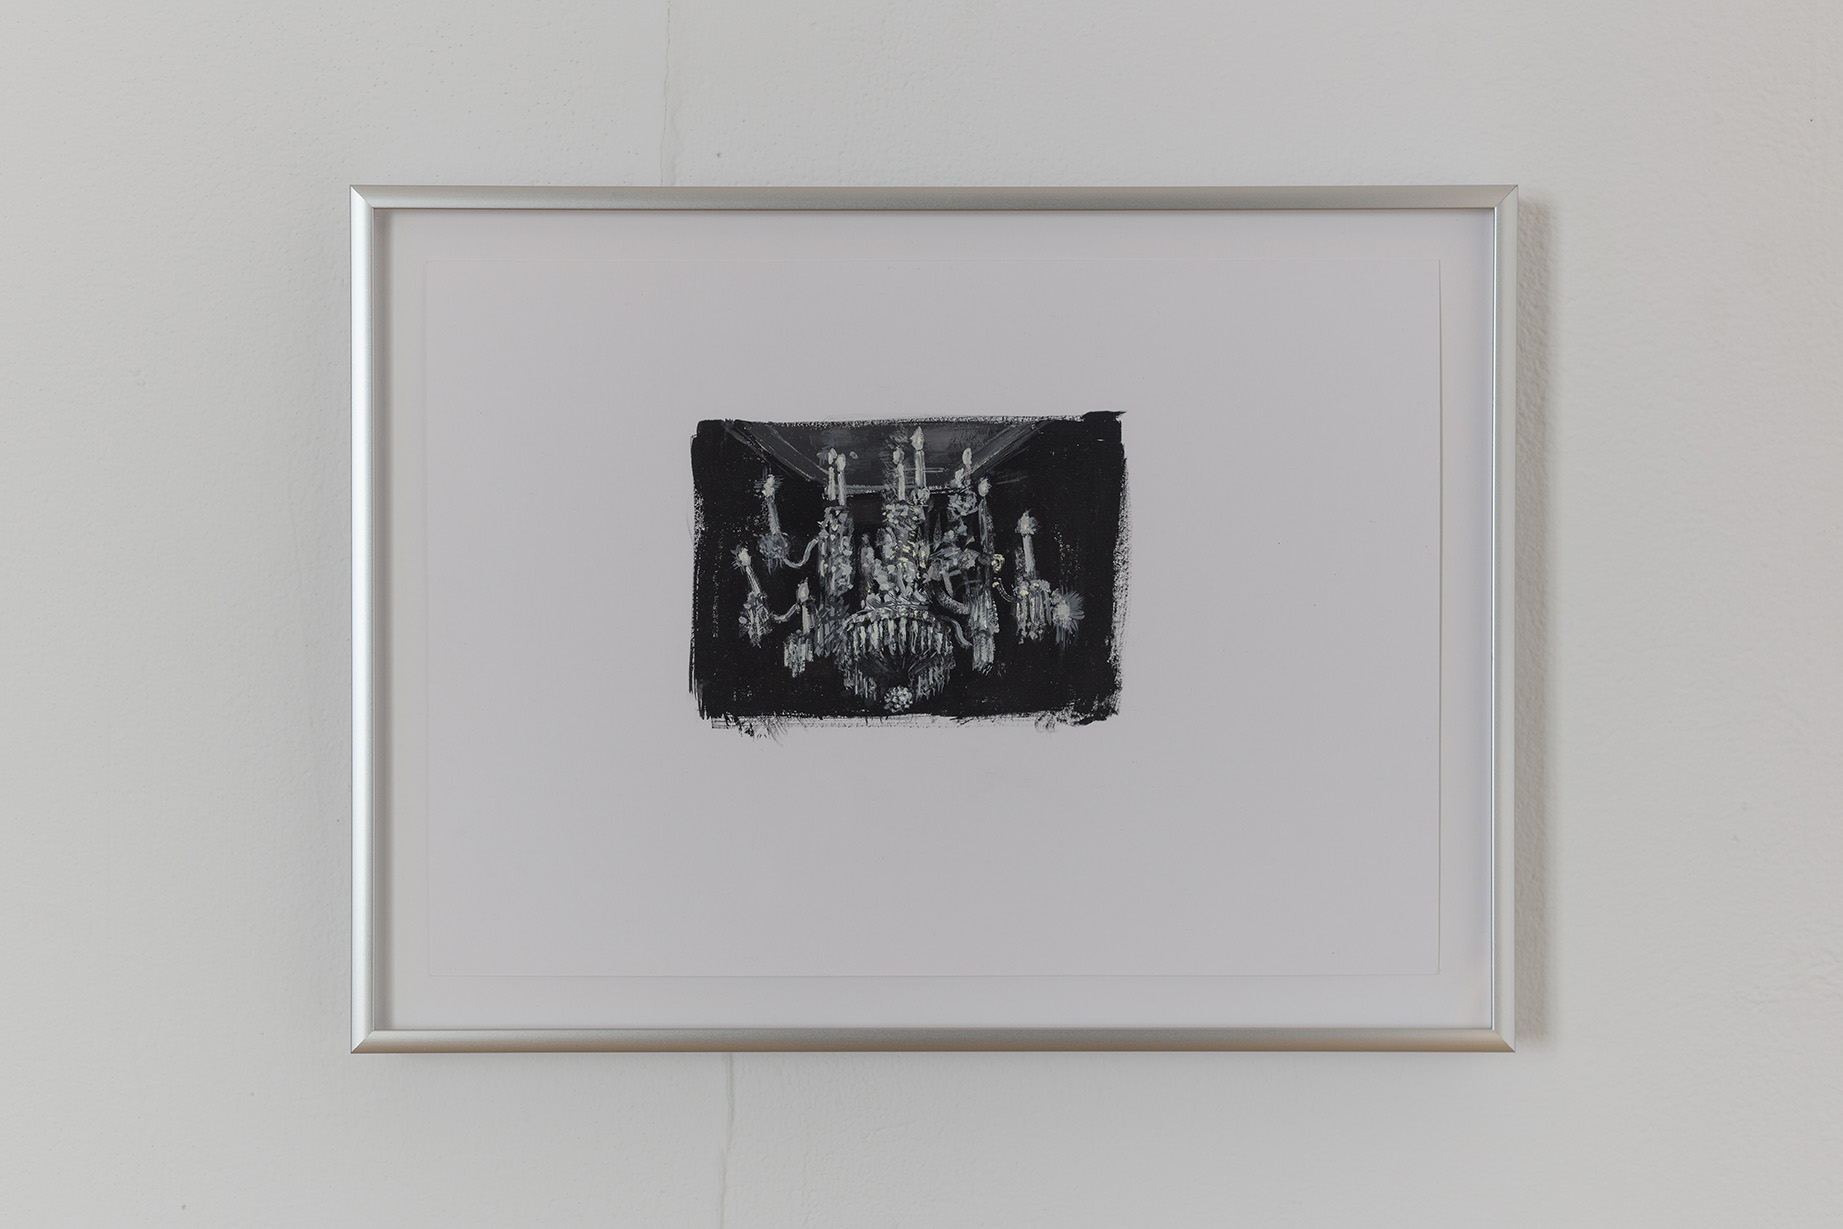 [Thin, silver metal frame hanging on a white wall. The drawing within the frame is of a crystal chandelier. It is rendered in black and white. It looks luminous. The composition is central on the page and there is a lot of empty space on paper surrounding the image.]